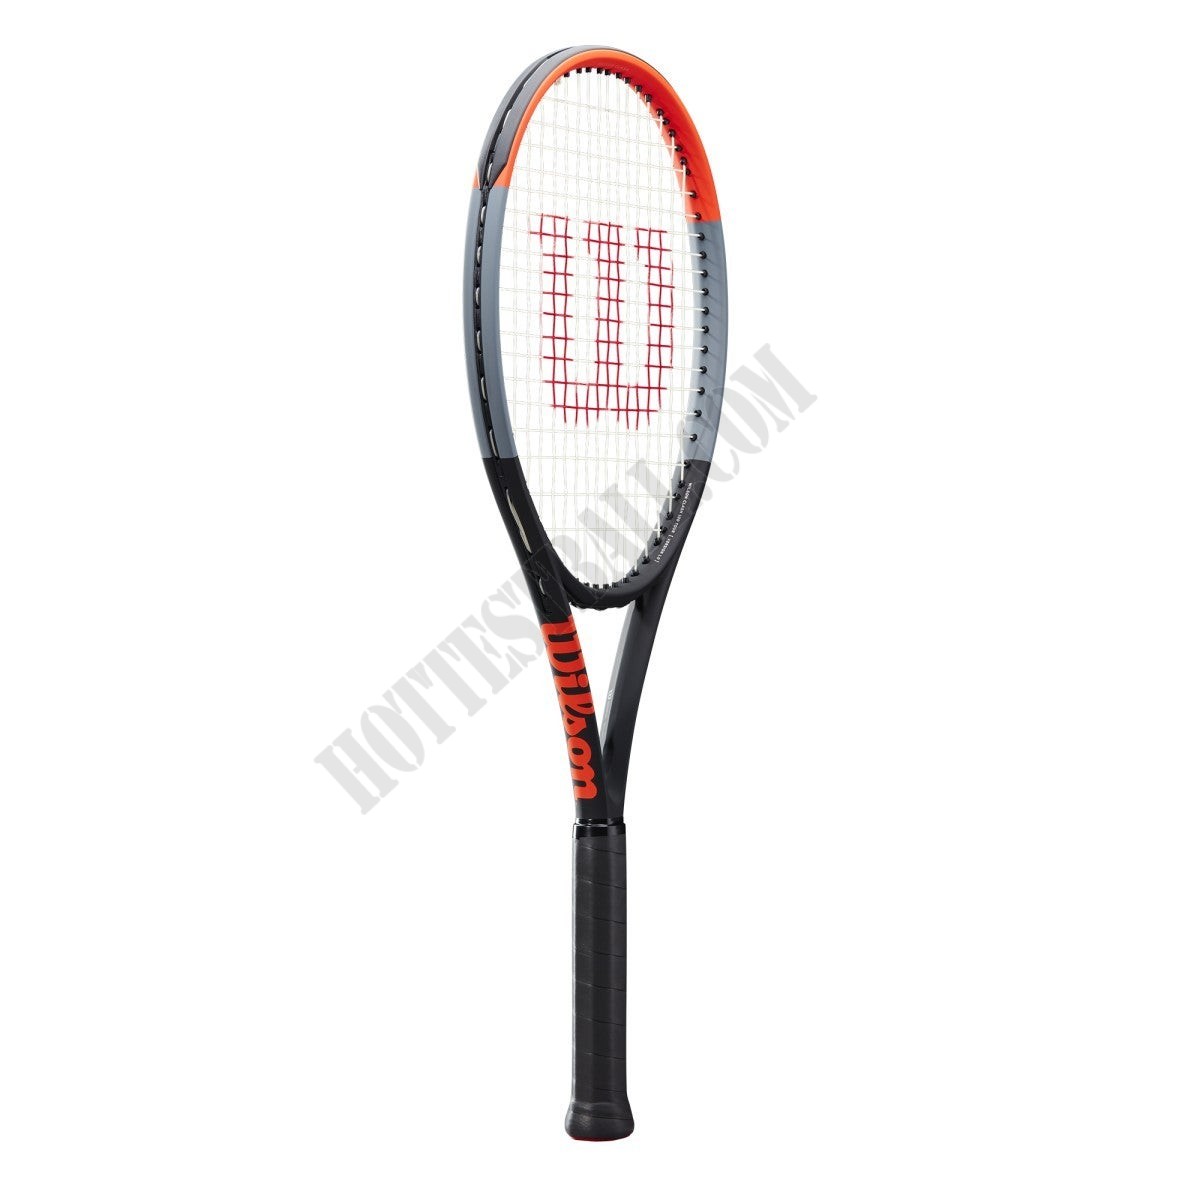 Clash 100 Pro (Formerly Tour) Tennis Racket - Wilson Discount Store - -0